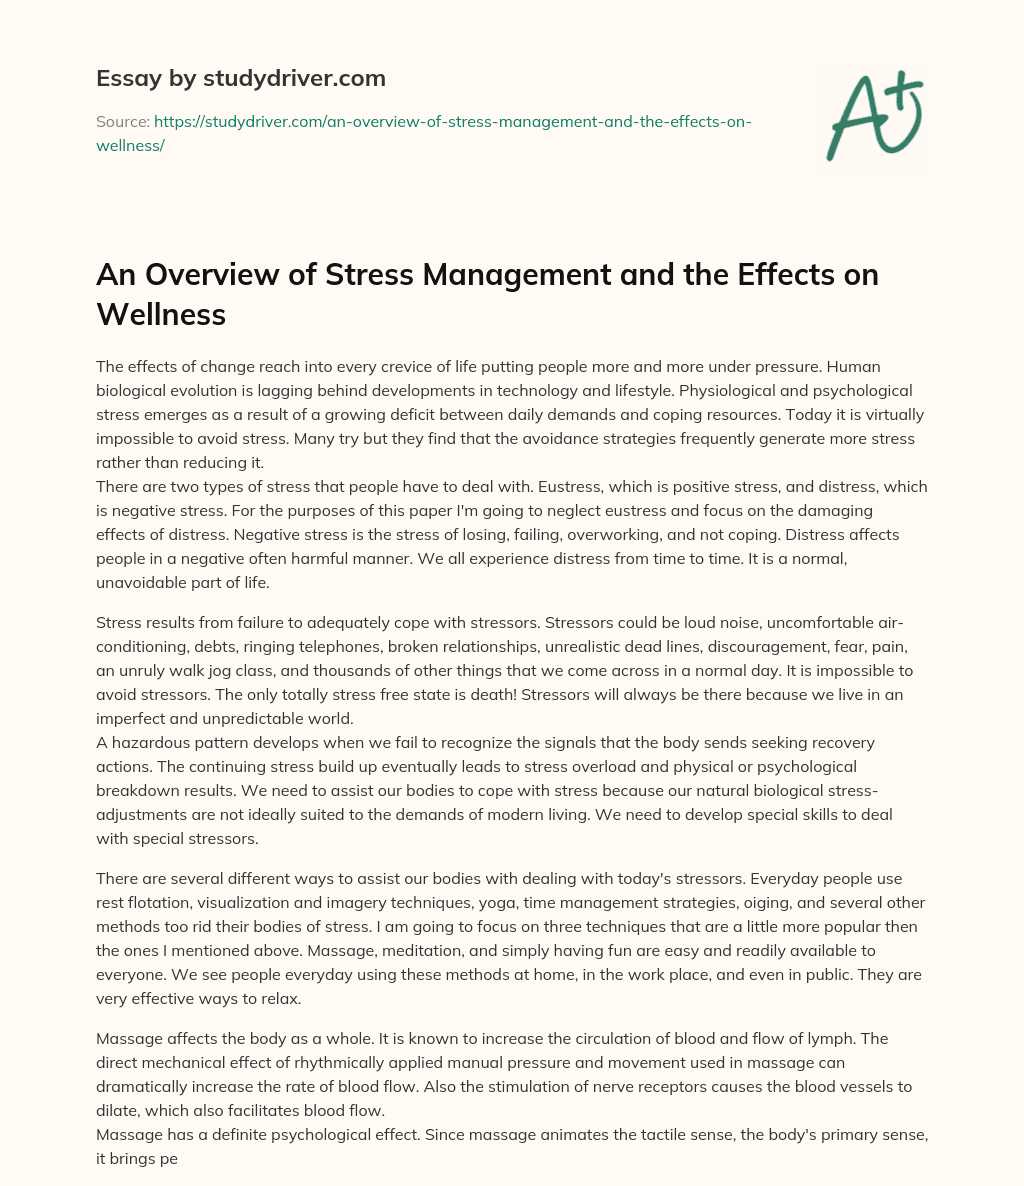 An Overview of Stress Management and the Effects on Wellness essay